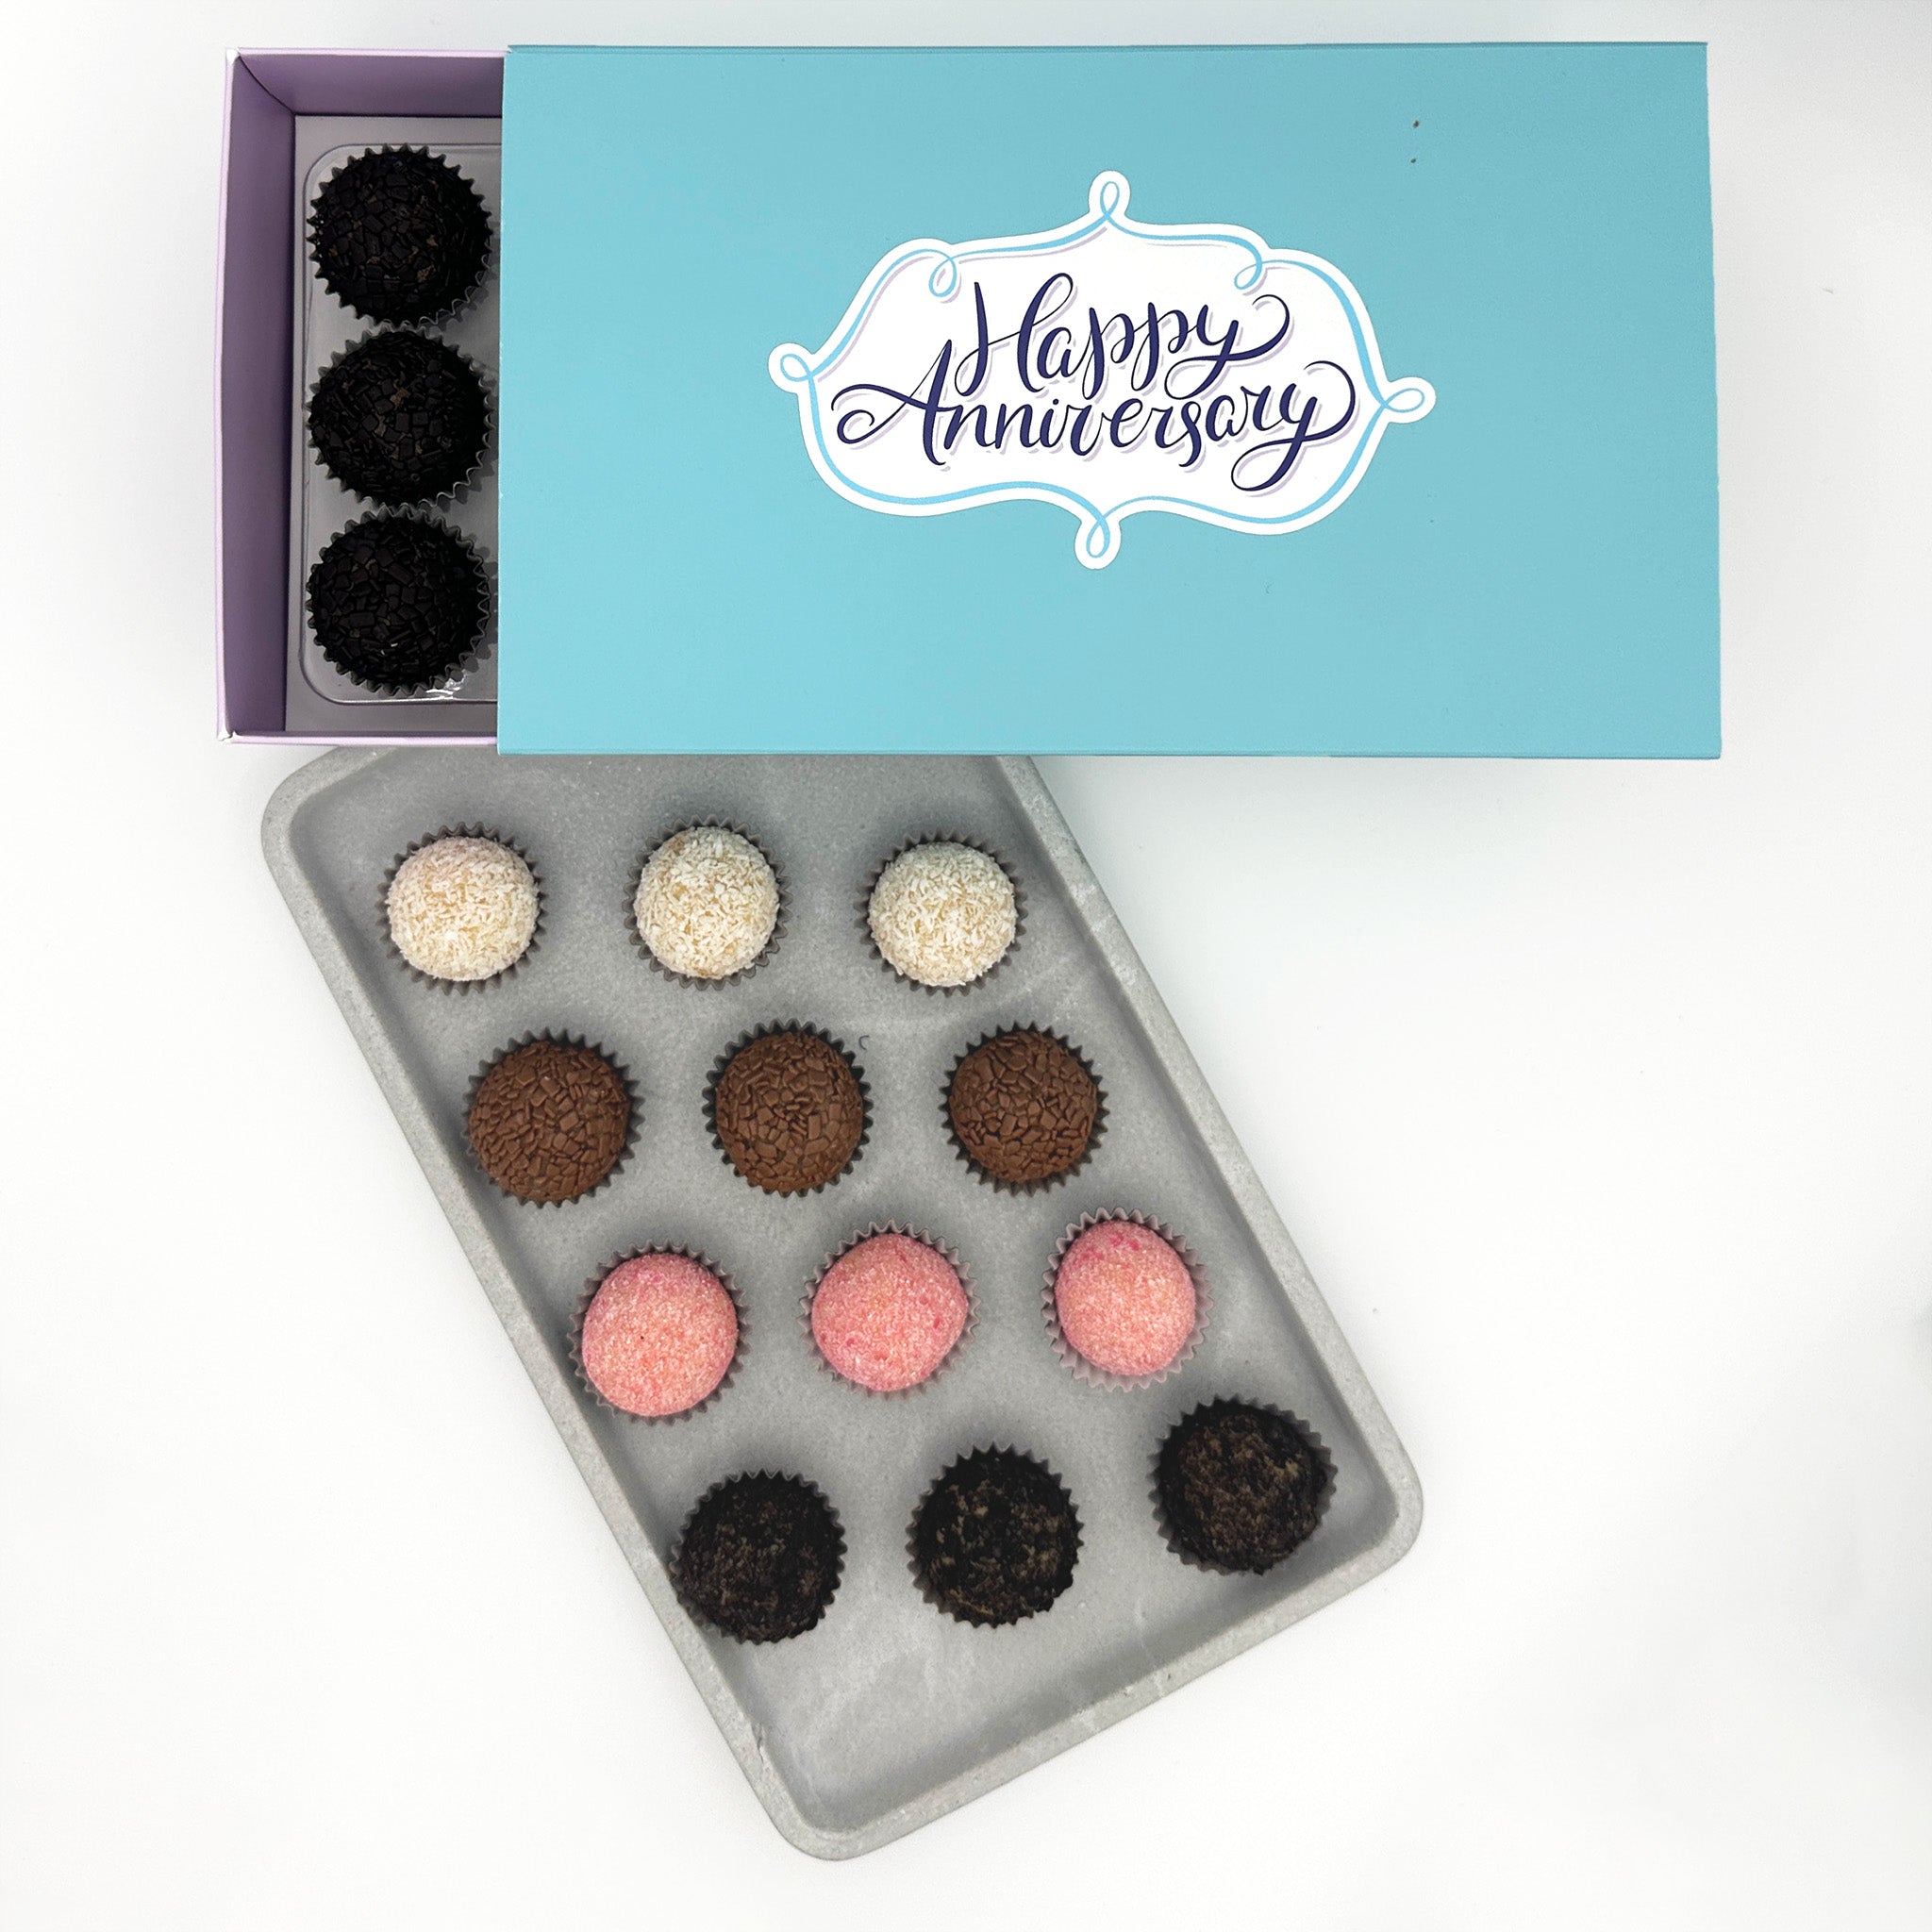 A box of Anniversary Classic Brigadeiros truffles with the words happy anniversary, available in a variety of flavors.